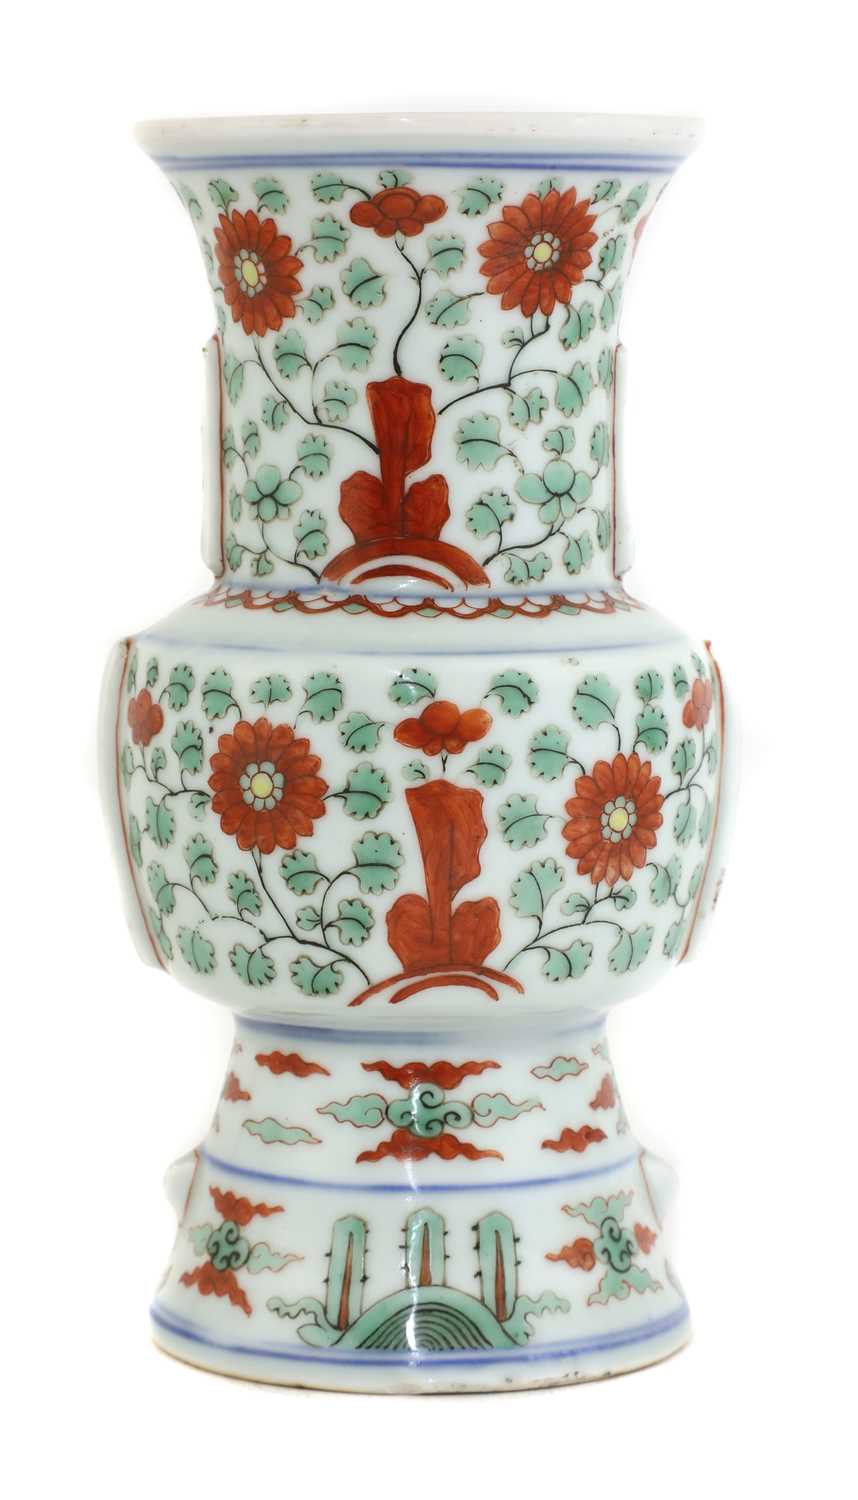 Lot 48 - A Chinese polychrome-decorated gu vase